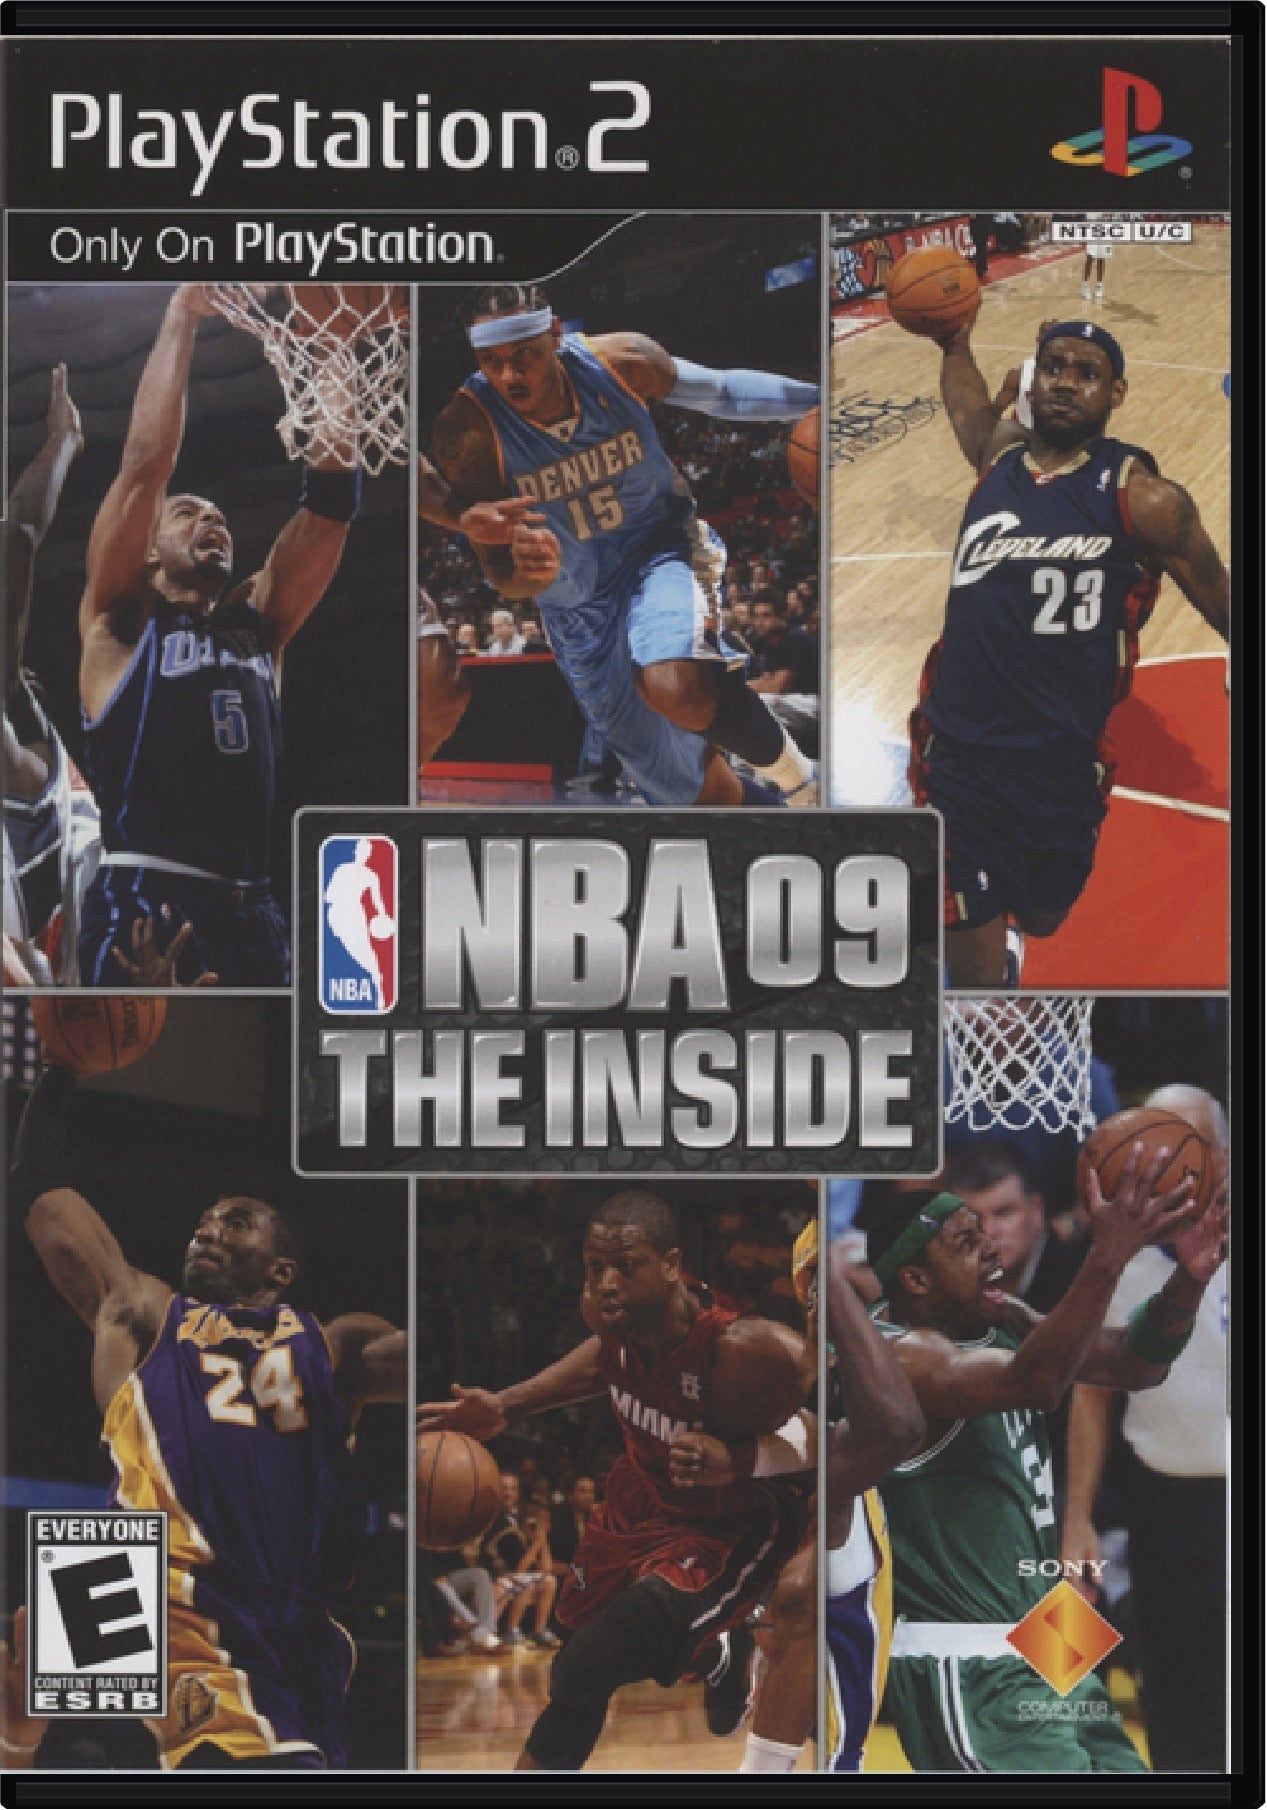 NBA 09 The Inside Cover Art and Product Photo